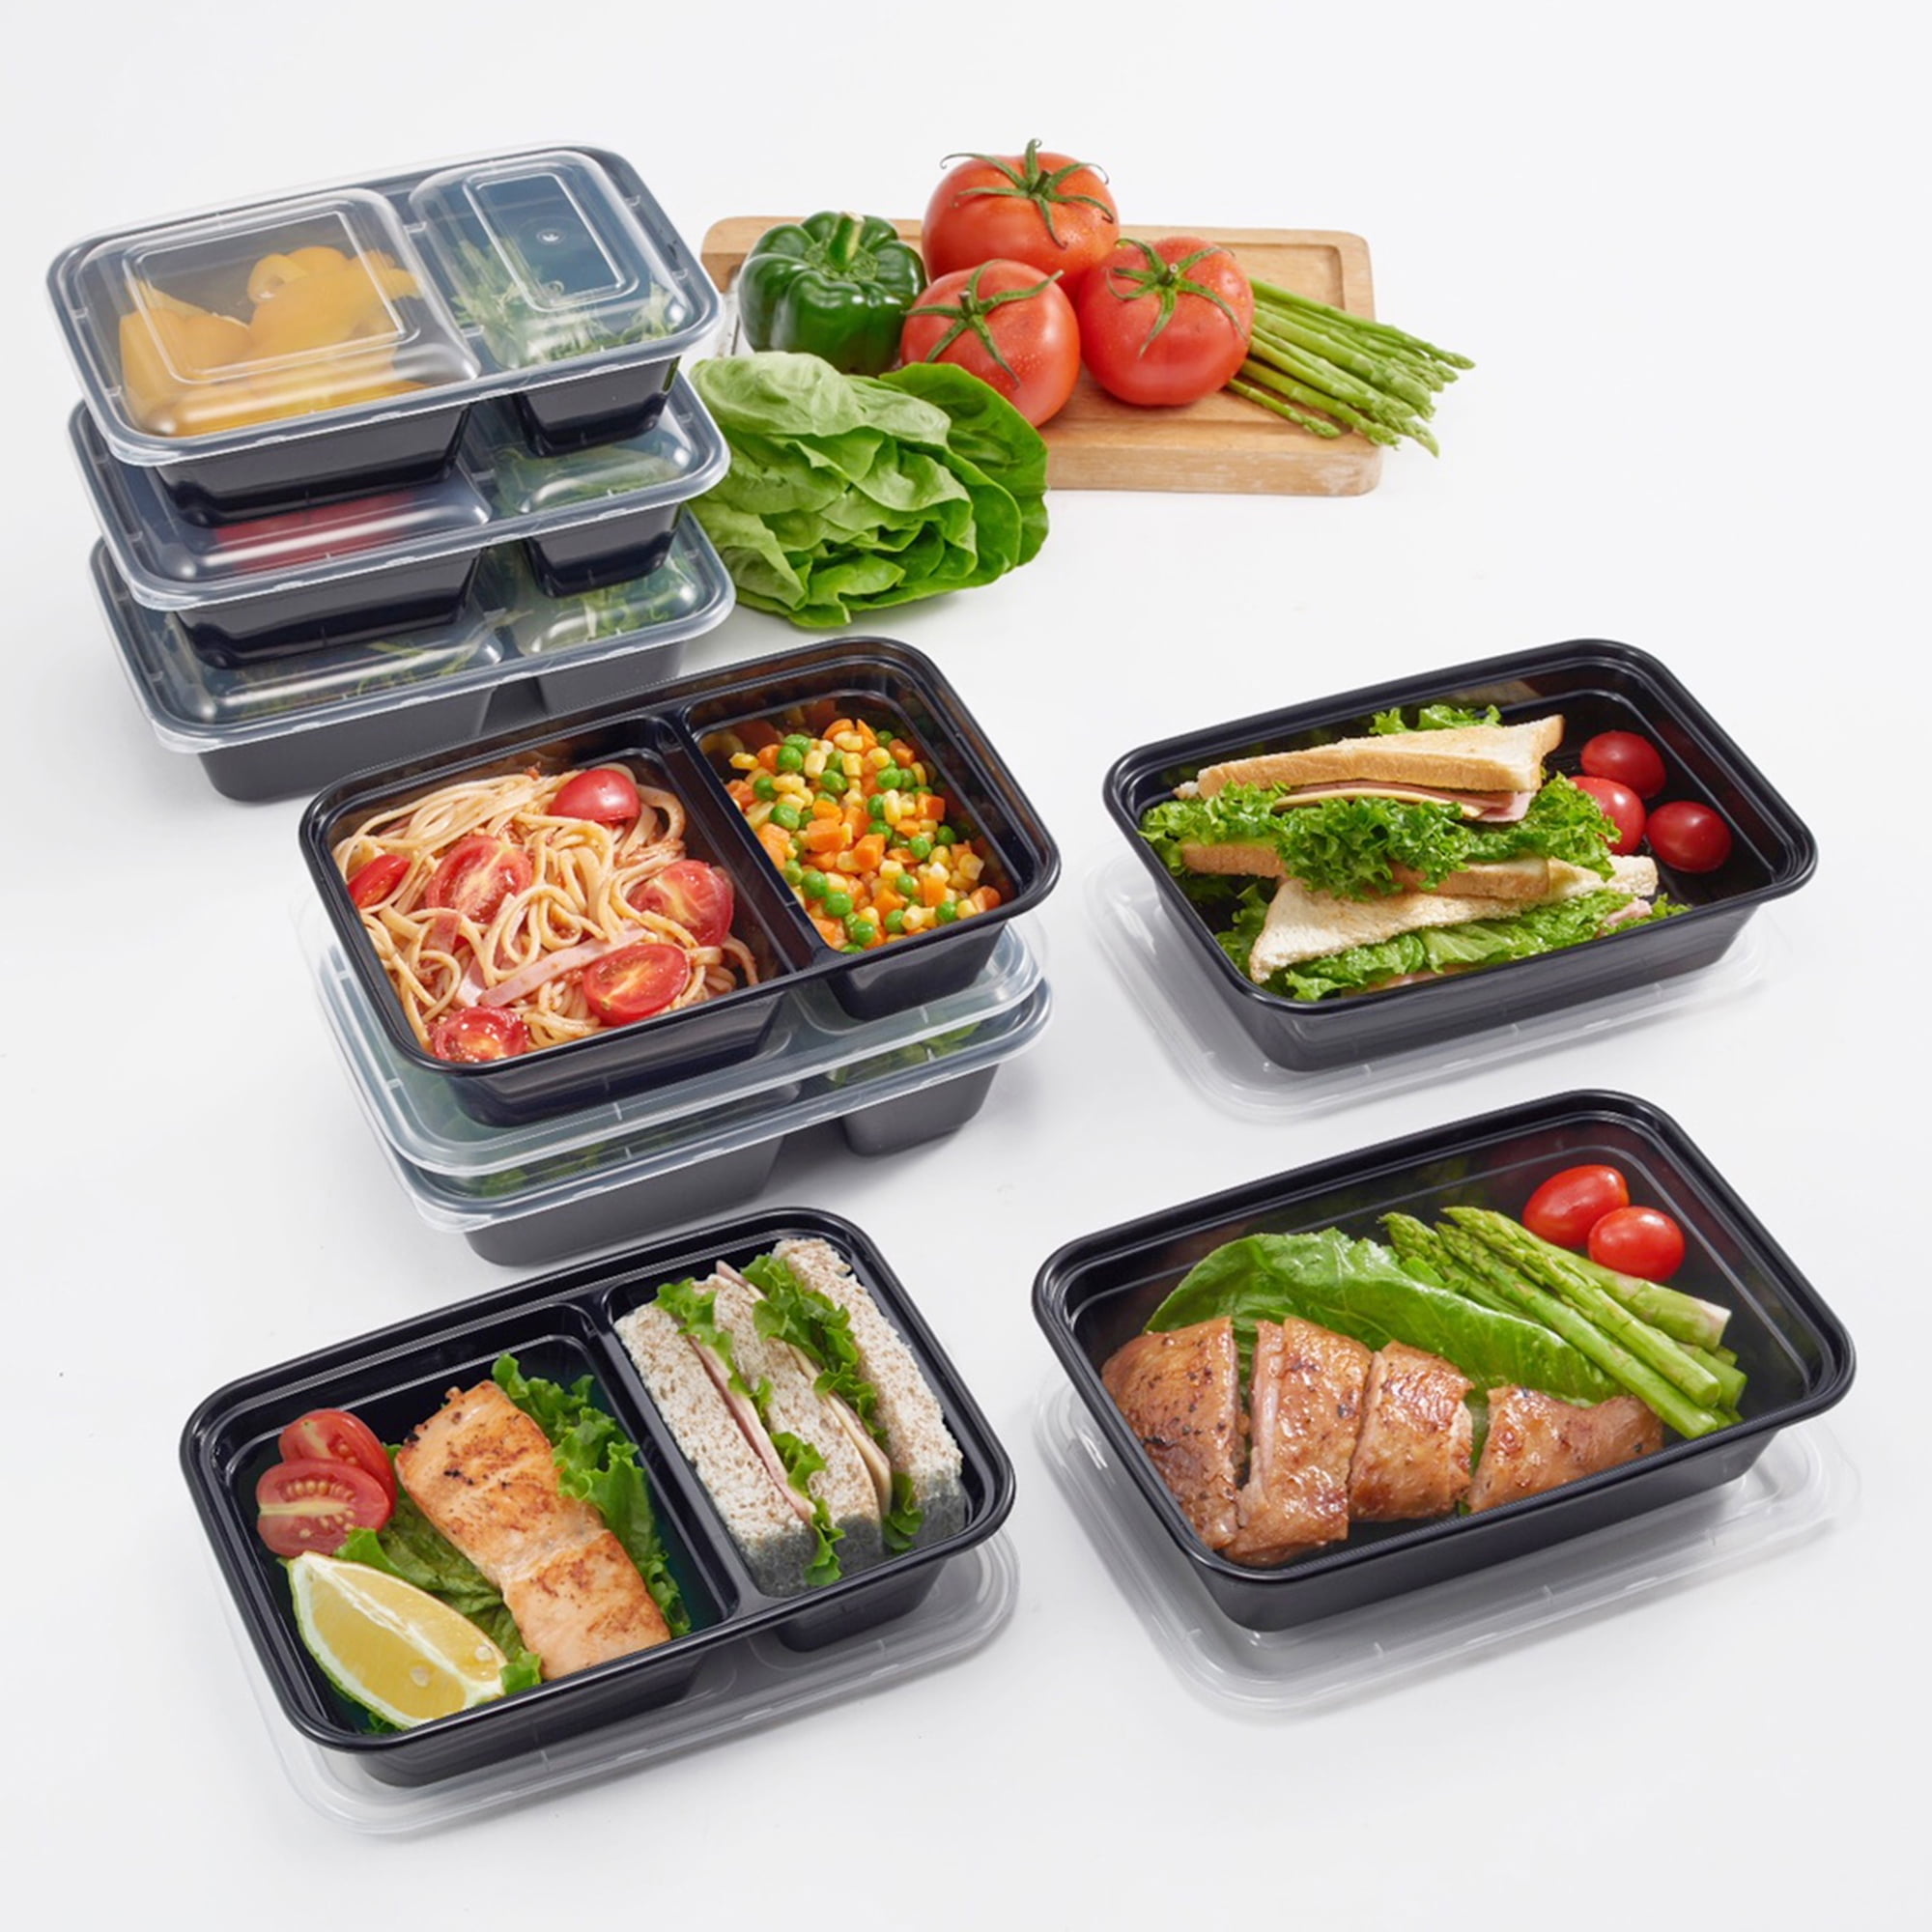 Mainstays 2 Sections Meal Prep Food Storage Containers 5 Pk 10 pc